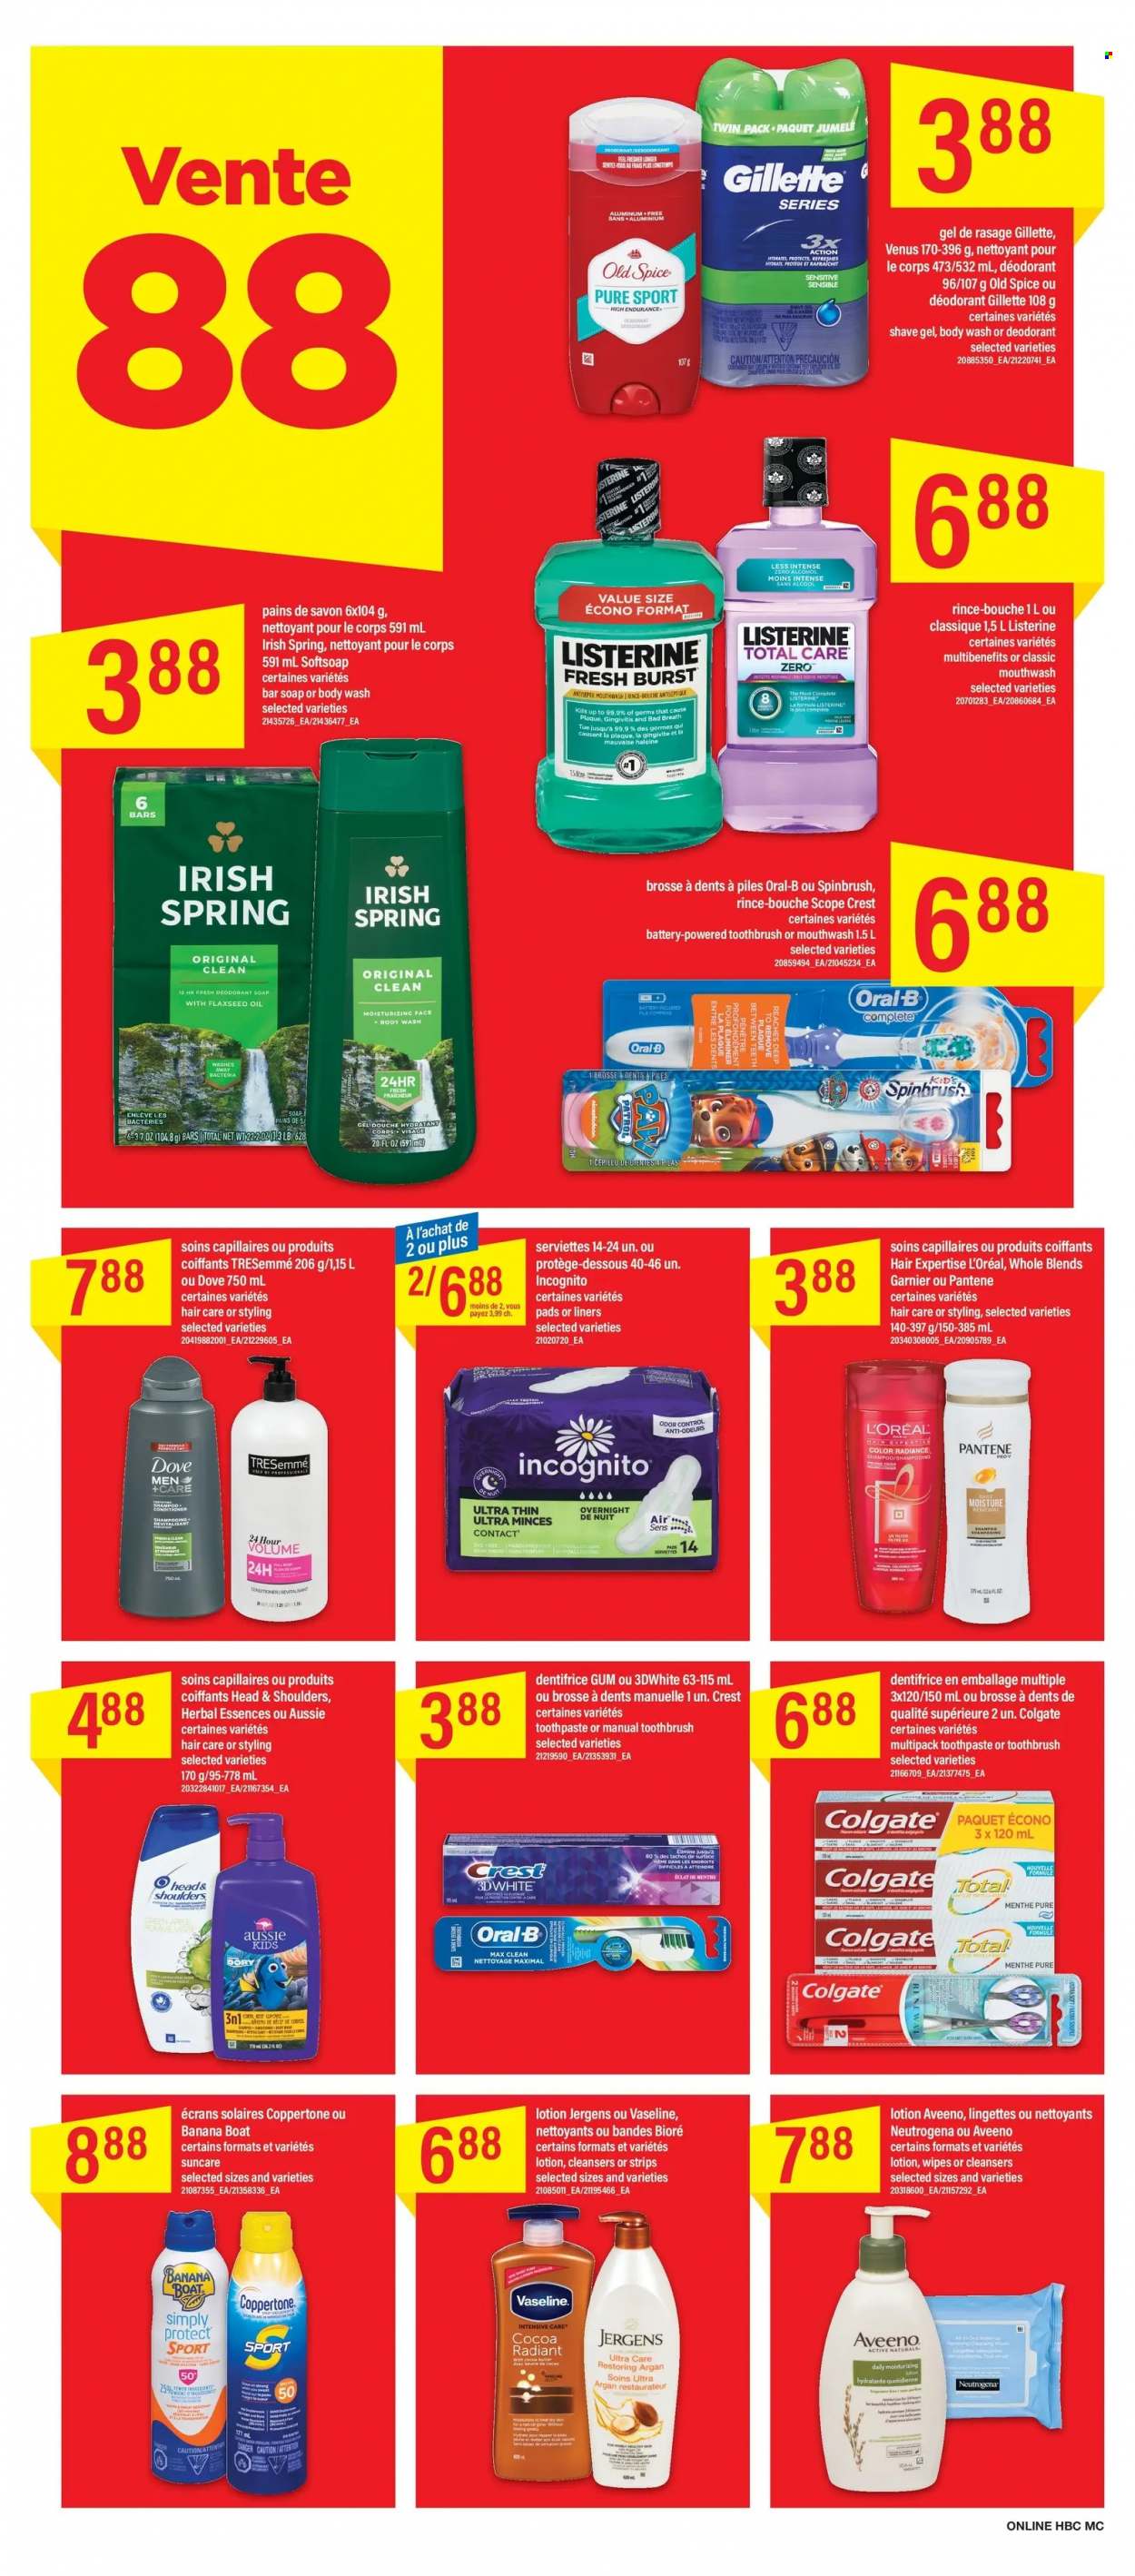 thumbnail - Maxi & Cie Flyer - May 19, 2022 - May 25, 2022 - Sales products - strips, spice, oil, alcohol, wipes, Aveeno, body wash, Softsoap, Vaseline, soap bar, soap, toothbrush, toothpaste, mouthwash, Crest, sanitary pads, L’Oréal, Bioré®, Aussie, conditioner, TRESemmé, Herbal Essences, body lotion, Jergens, anti-perspirant, Gillette, shave gel, Venus, Dove, Colgate, Garnier, Listerine, Neutrogena, shampoo, Head & Shoulders, Pantene, Old Spice, Oral-B, deodorant. Page 13.